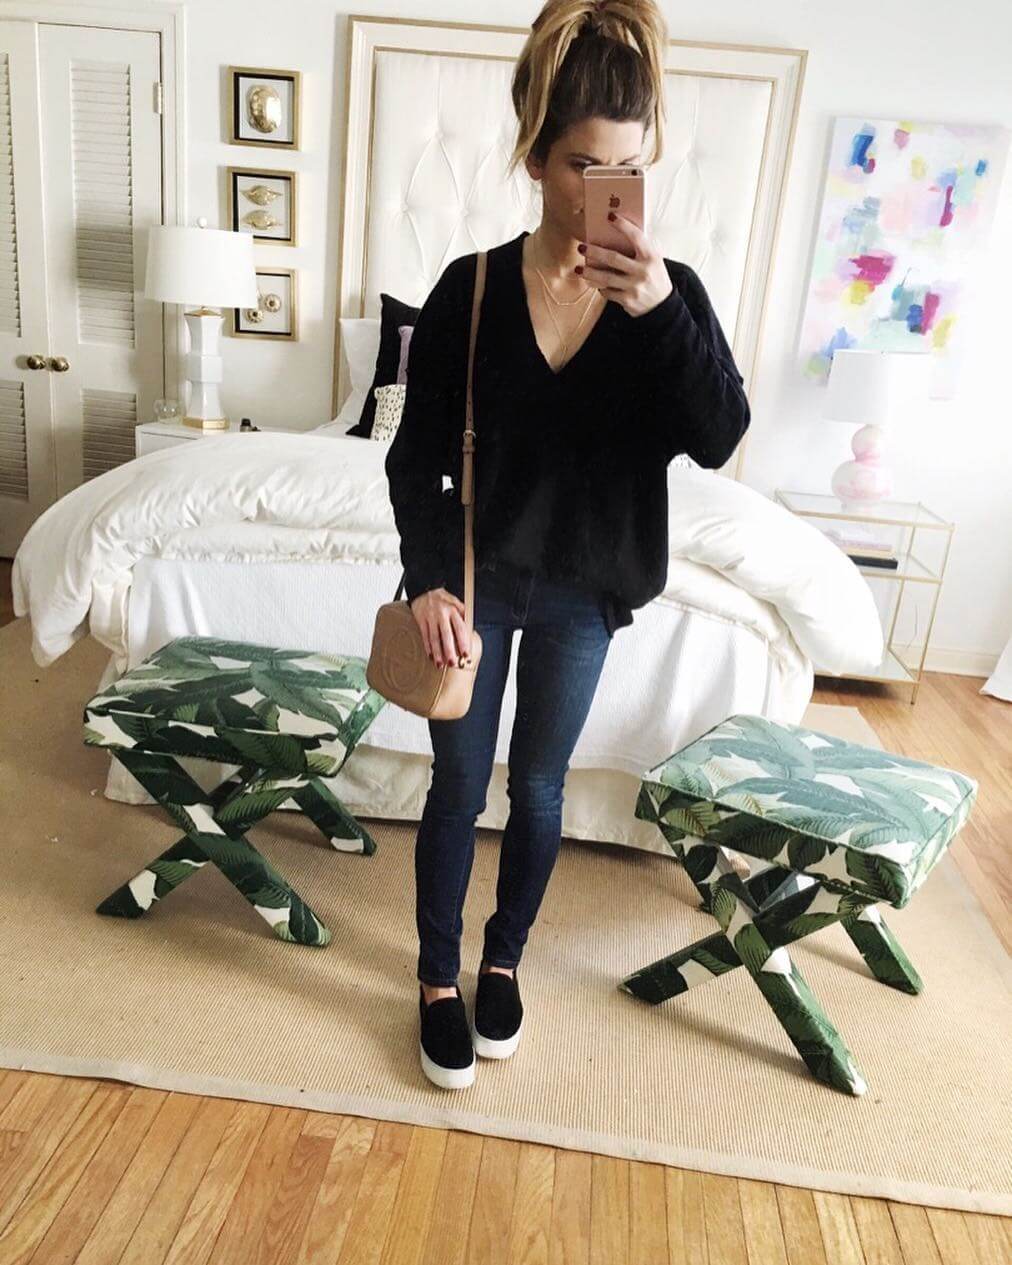 brighton the day mirror selfie, jeans, black oversized sweater, black slide on sneakers, gucci crossbody